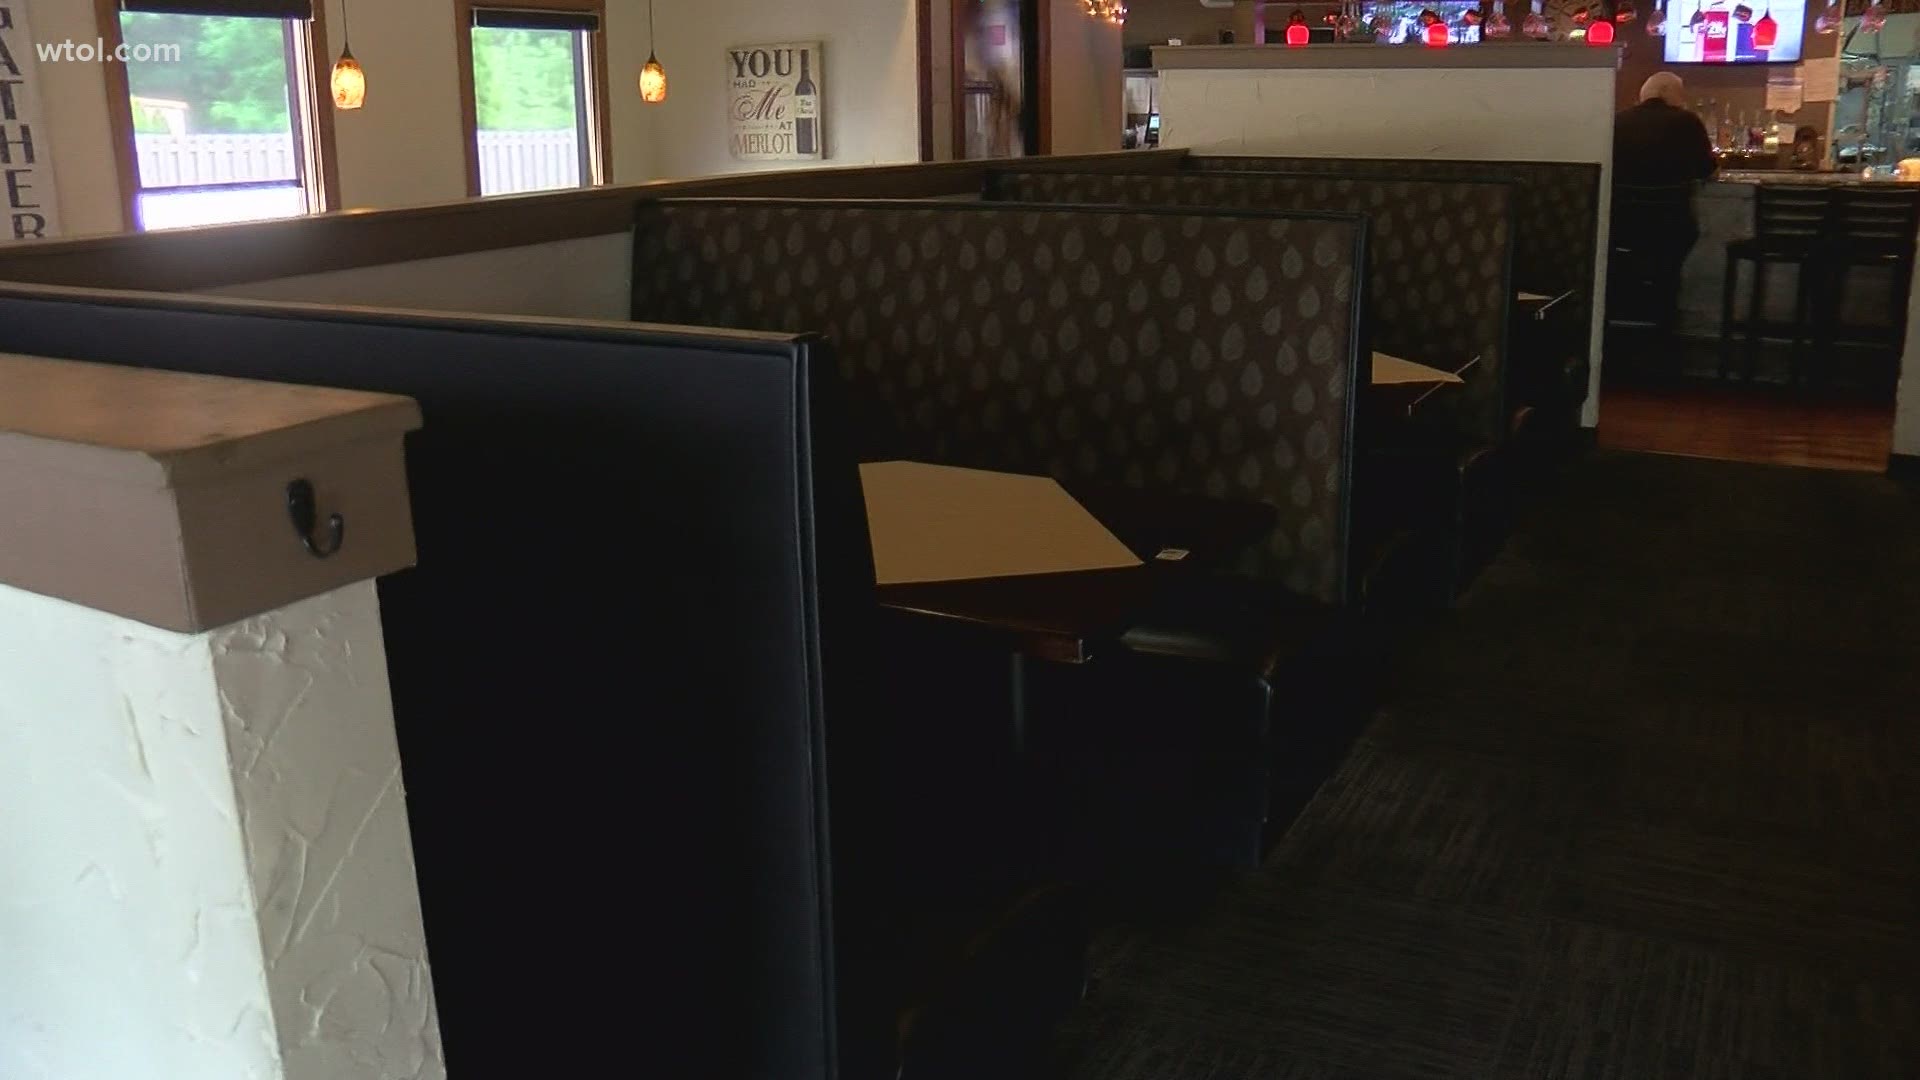 Sidelines Italian Grille general manager Jodi Vandenroek says the establishment needs to hire more cooks to keep up with the influx of customers.